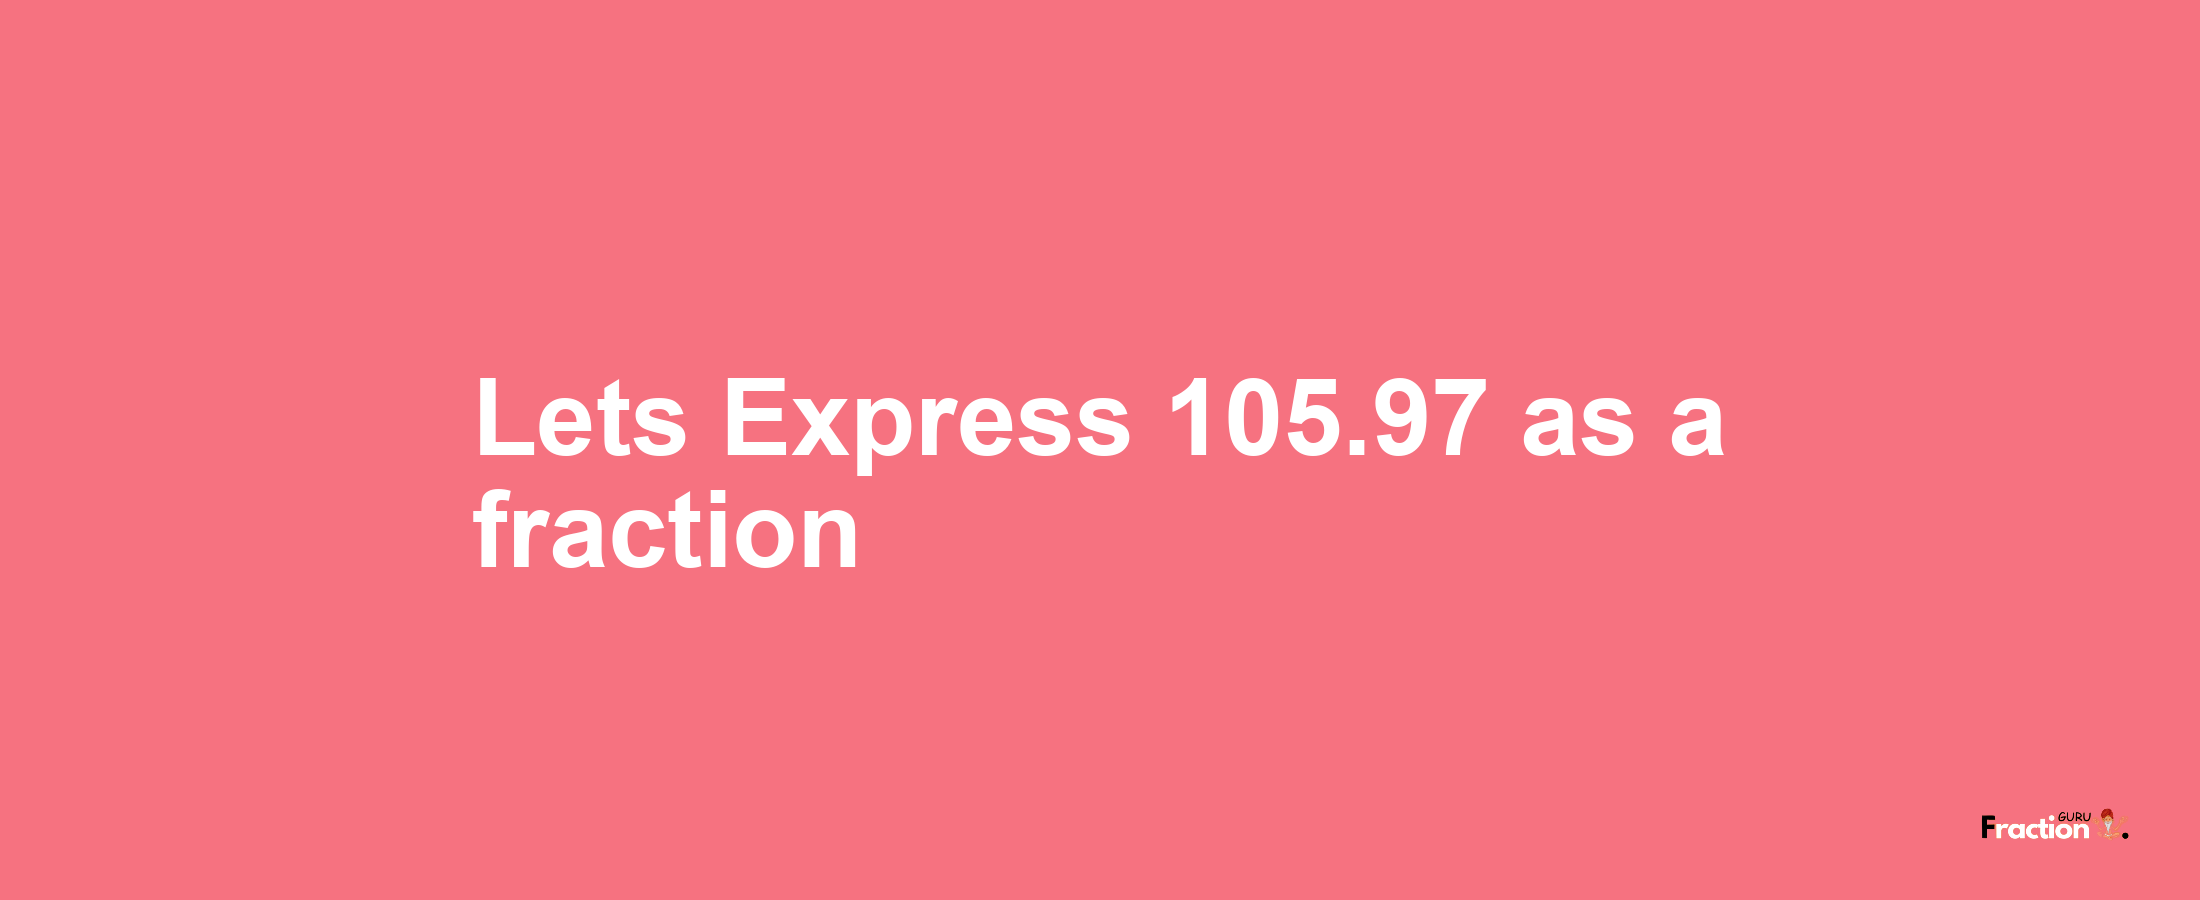 Lets Express 105.97 as afraction